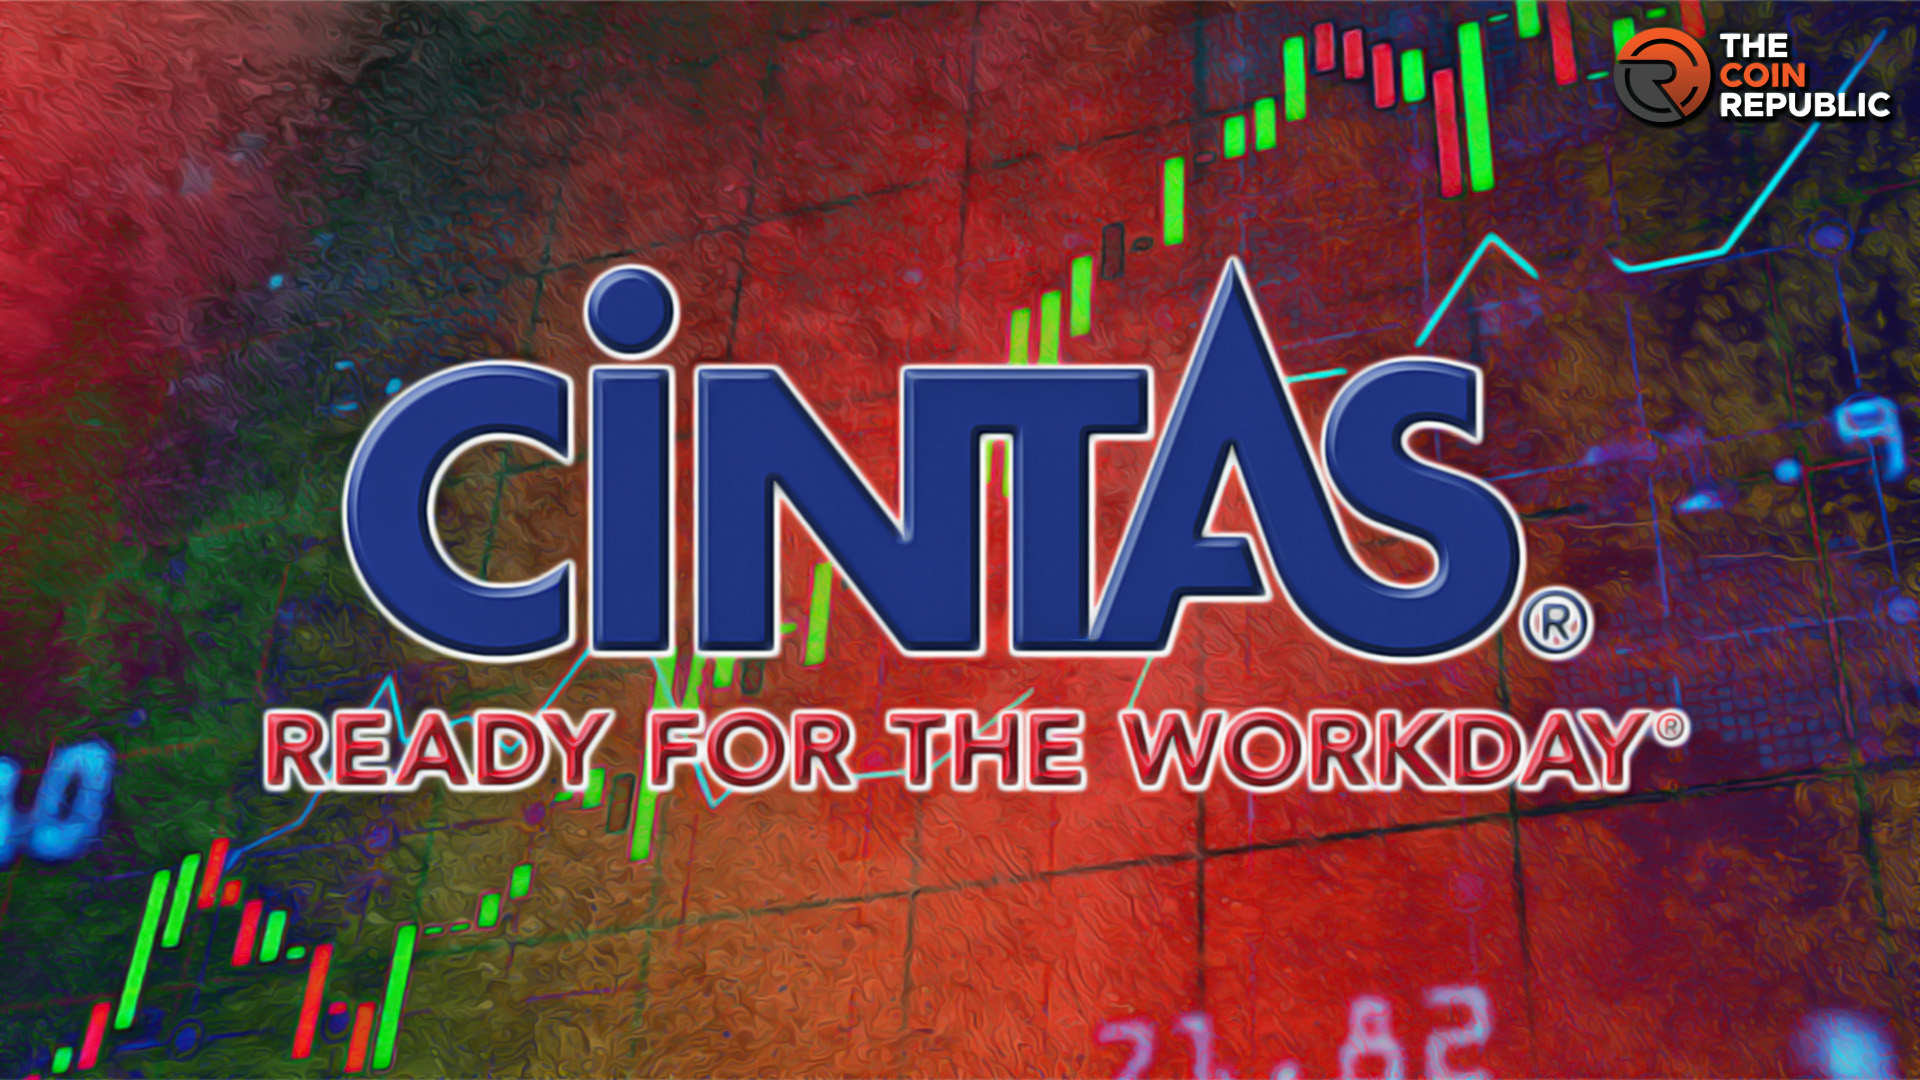 Cintas (CTAS) Stock Price at ATH of $505 Posting Positive Earnings